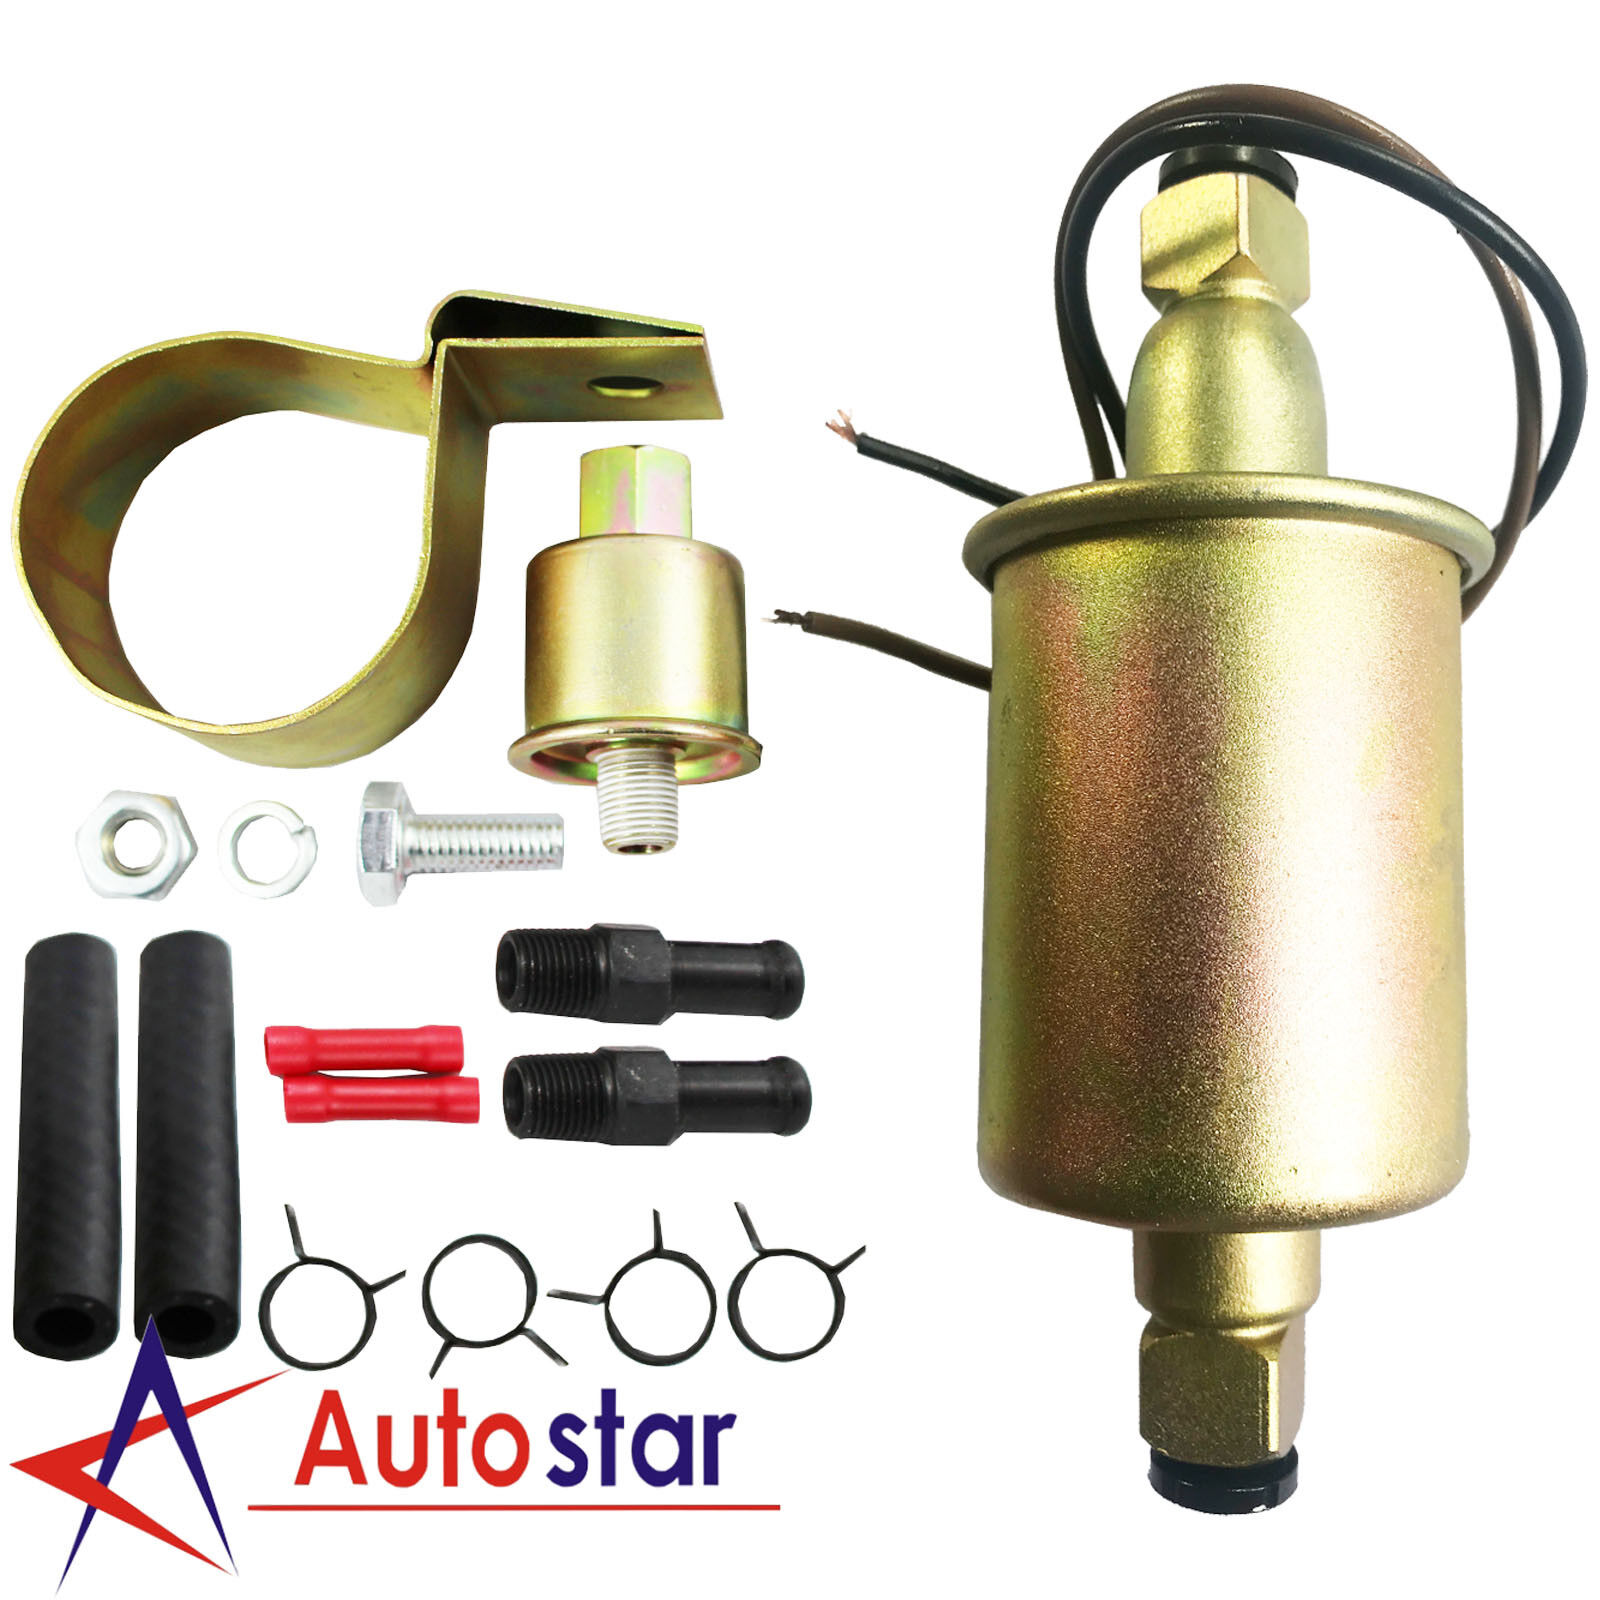 New Automotive Universal Electric Fuel Pump With Installation Kit E8016S